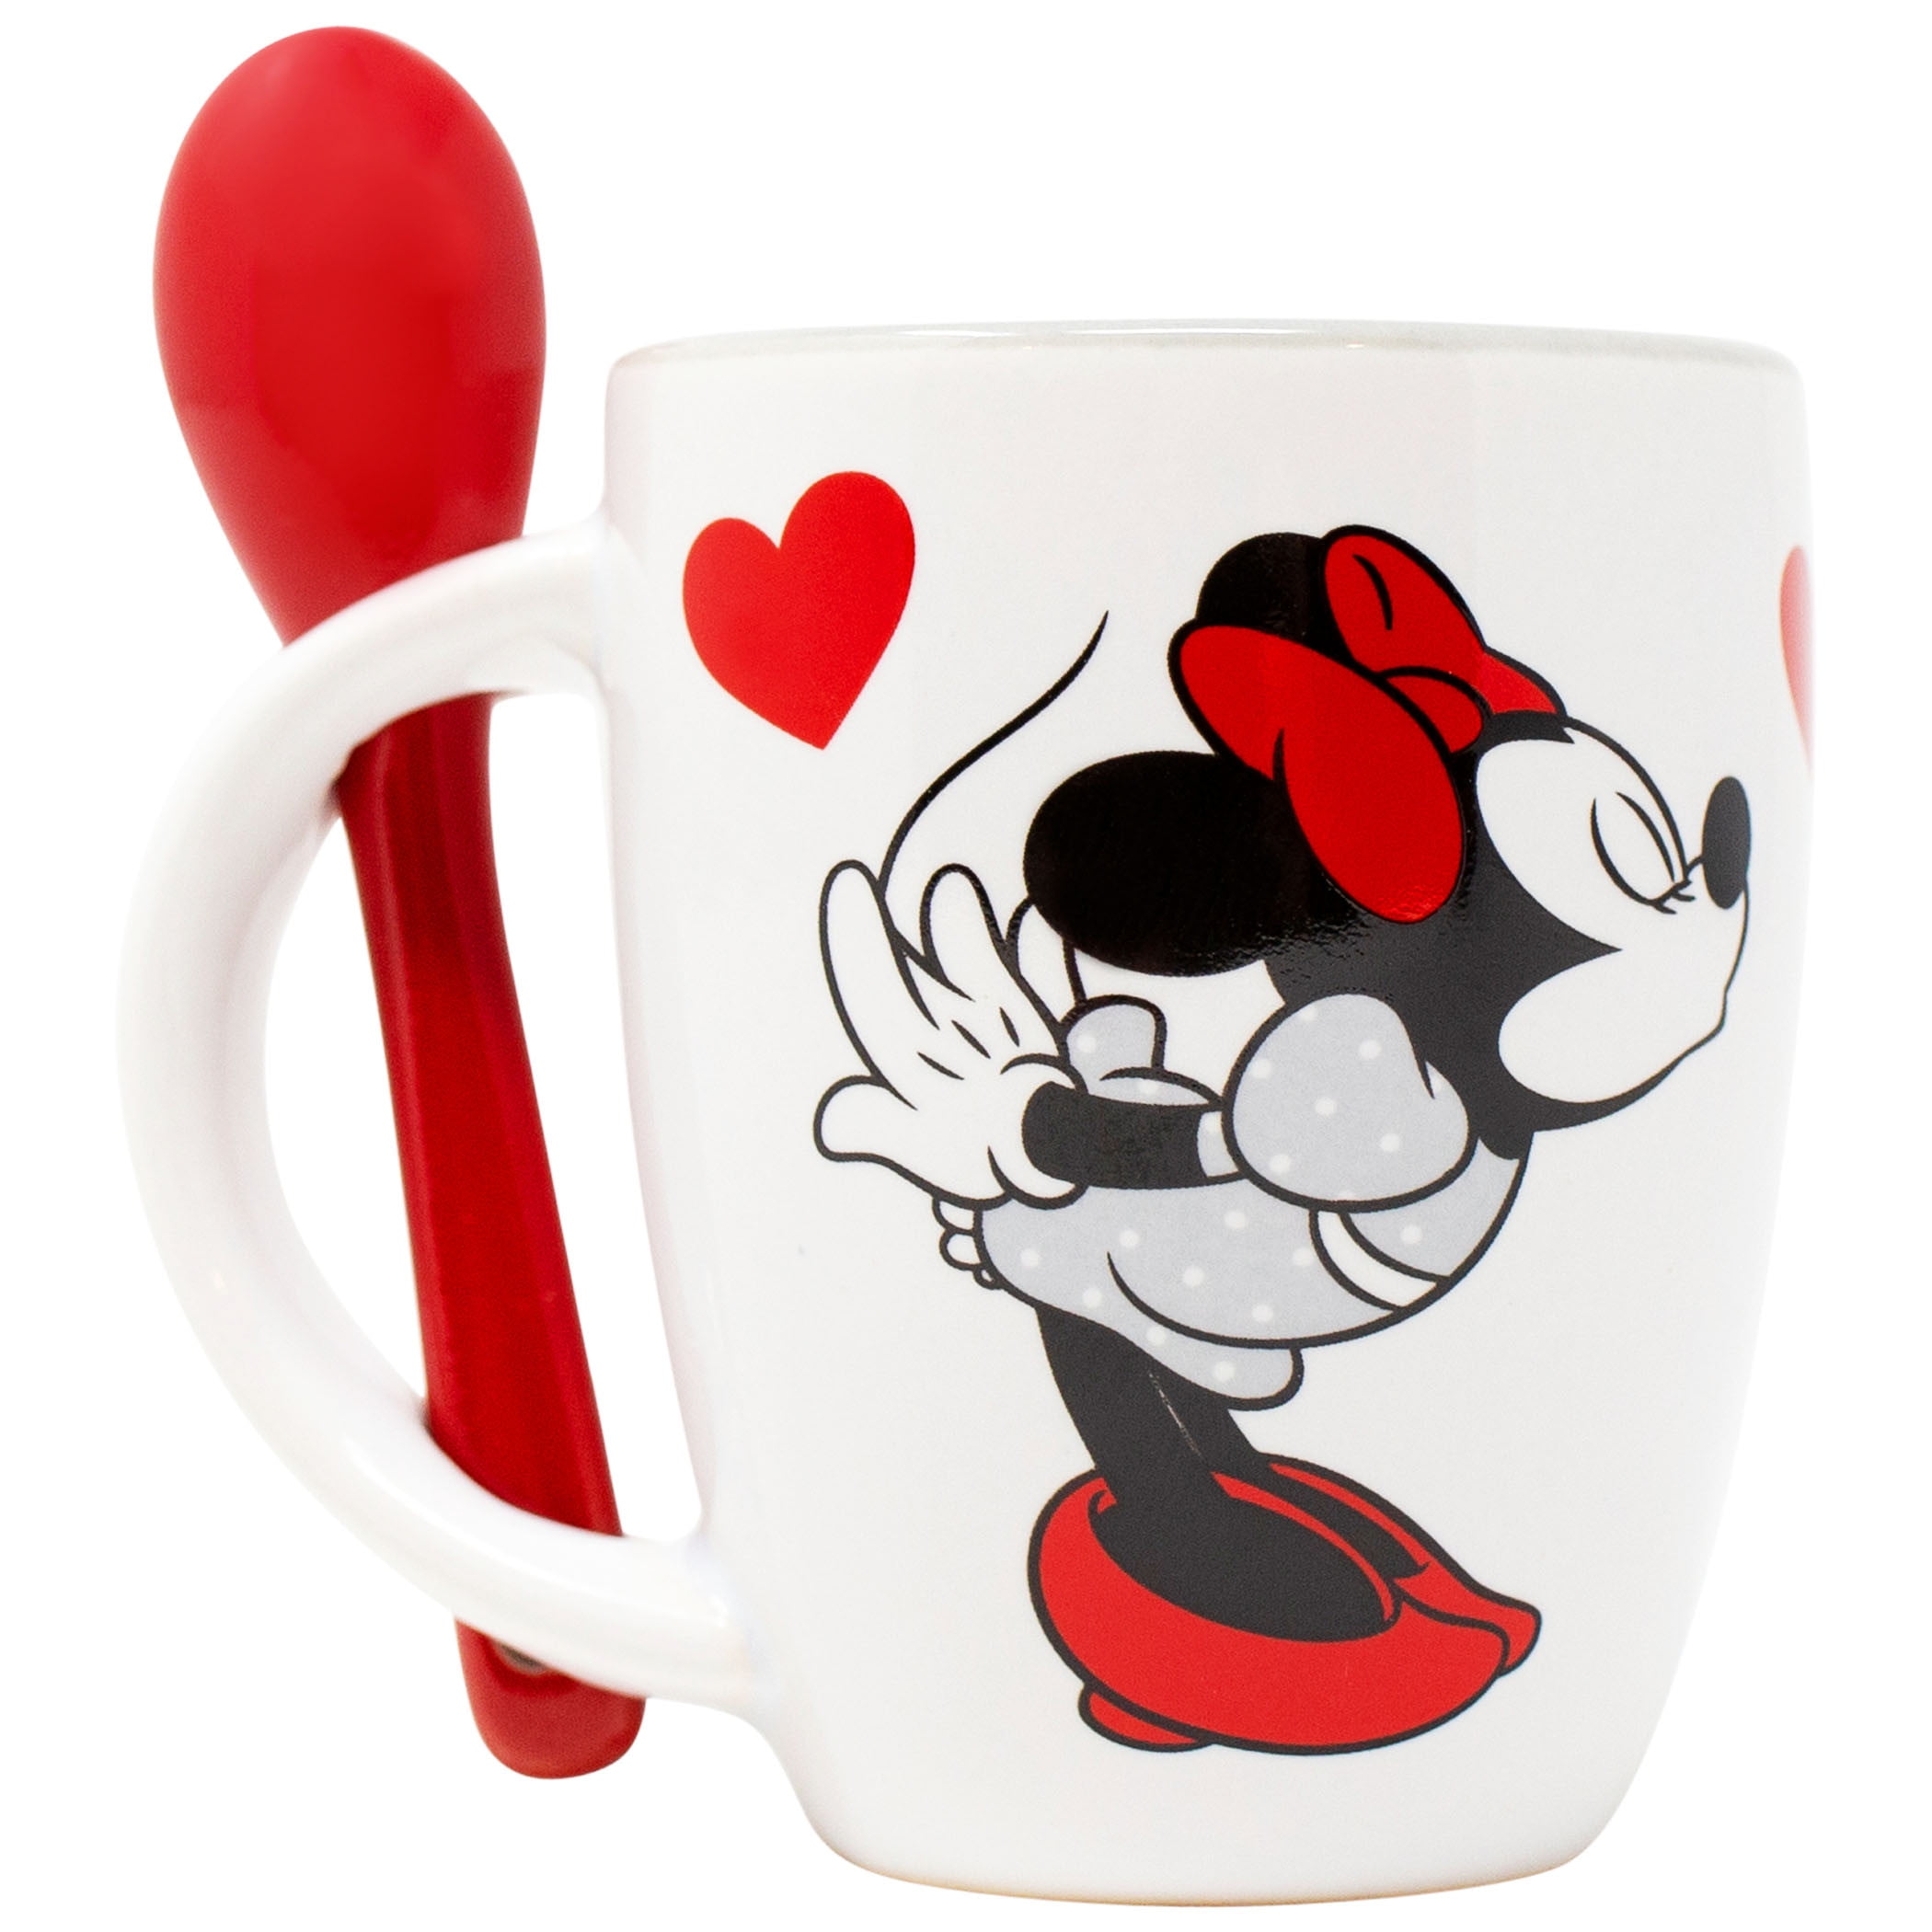 Disney - Mickey & Minnie - Stackable Espresso cups 'green' + saucers (